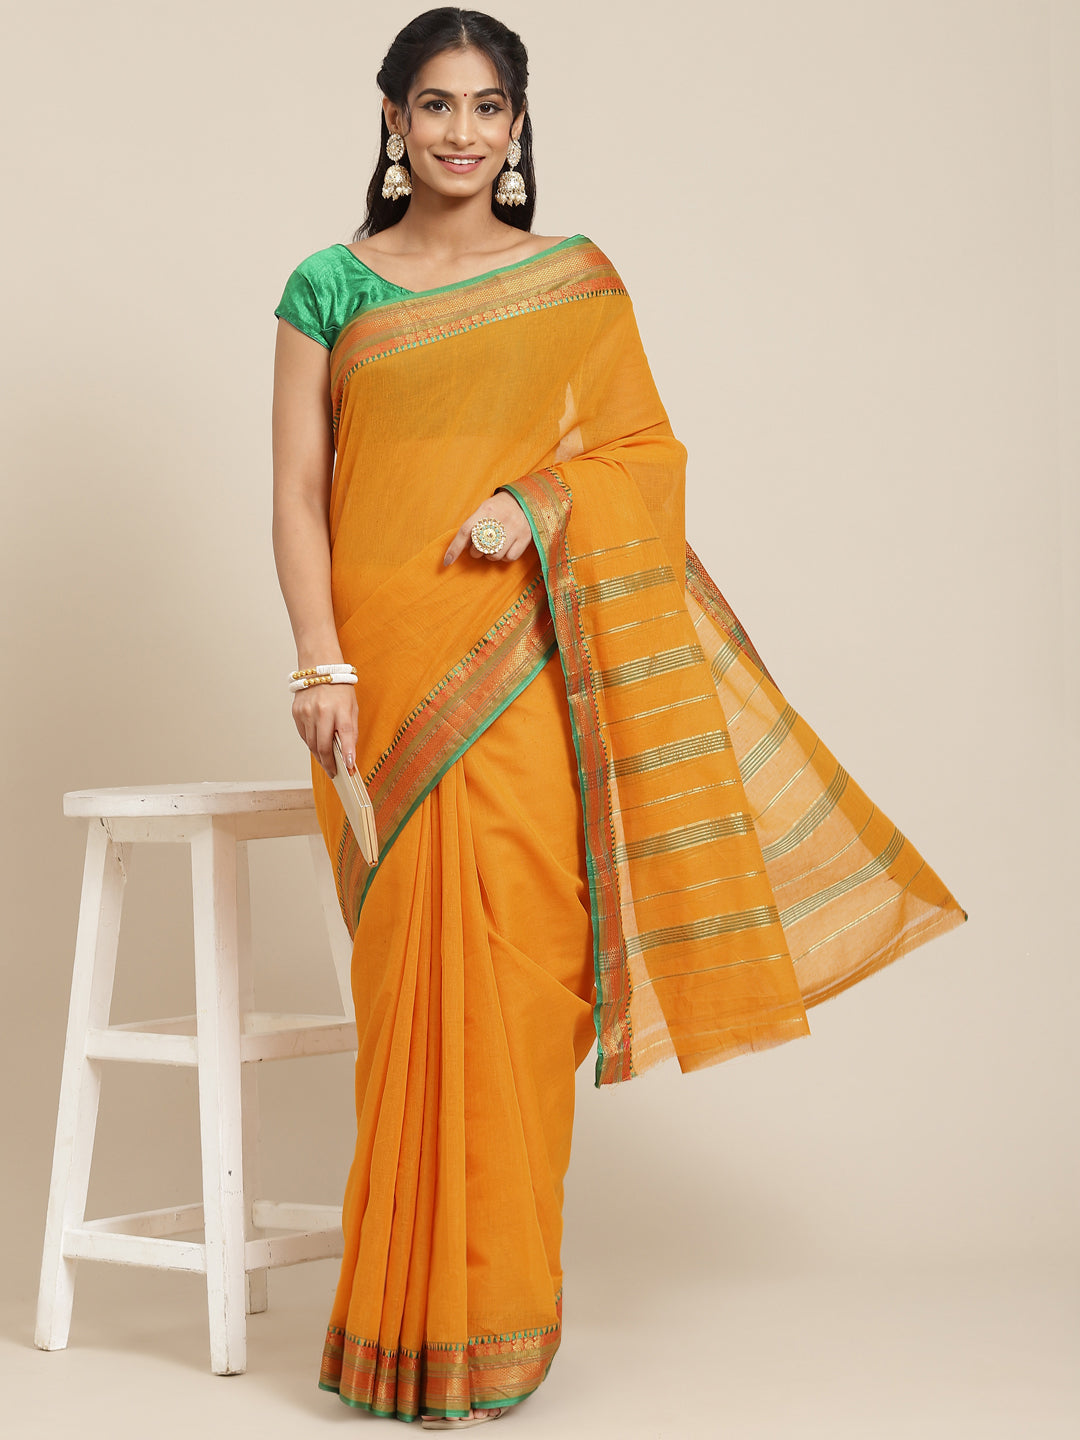 Ishin Women's Cotton Blend Mustard Solid Woven Design Saree With Blouse Piece